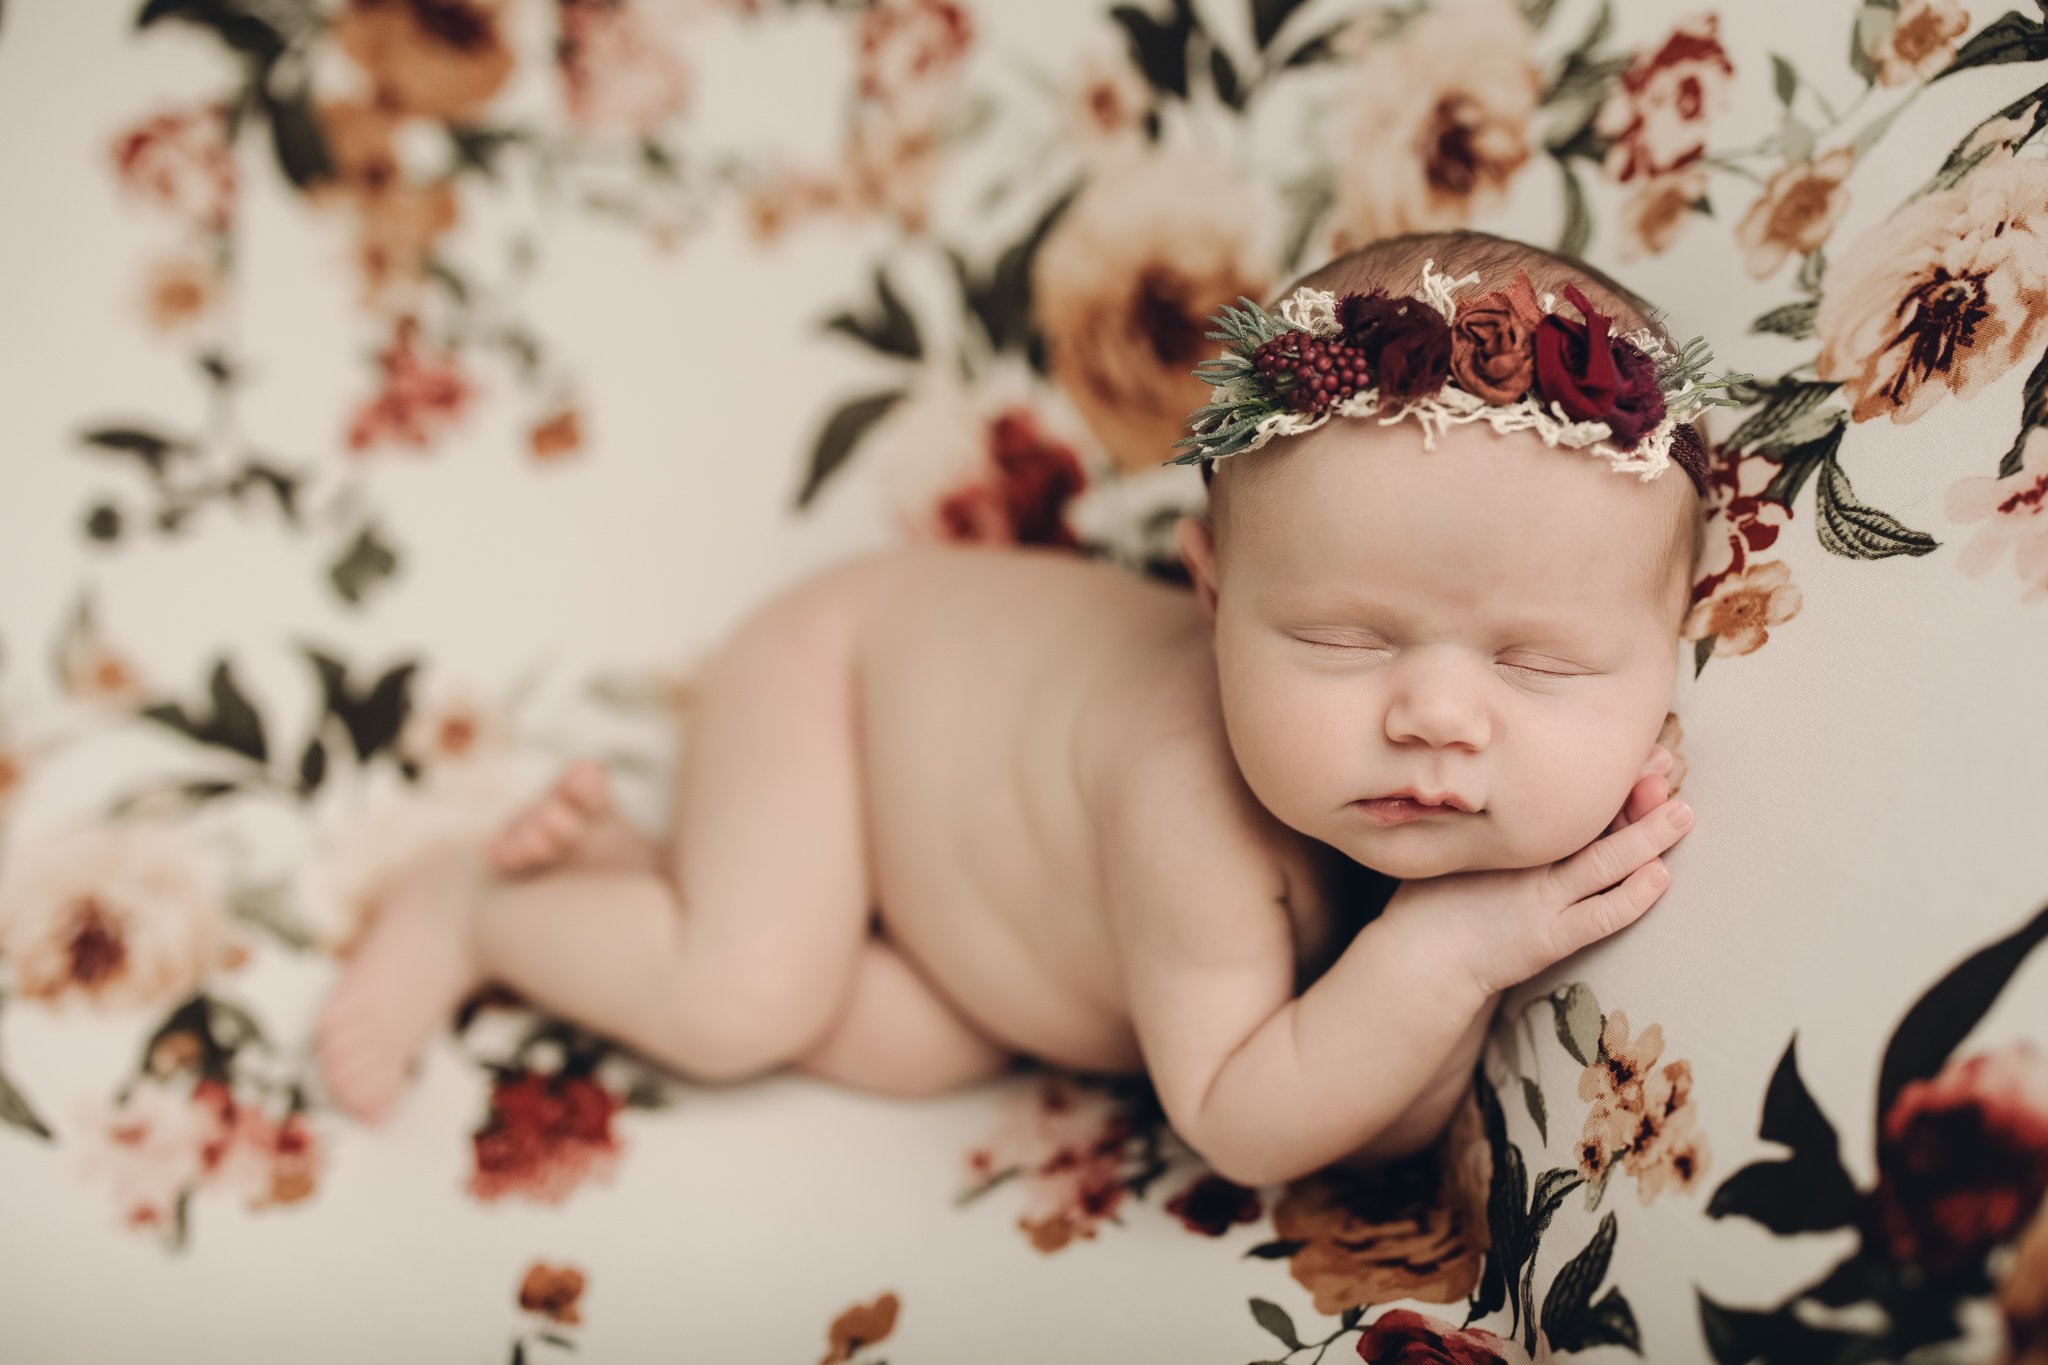 Posed_Studio_Newborn_Photographer_Second_Child_Siblings_Baby_Girl_Pink_Floral_by_Christie_Leigh_Photo_Champion_OH_Ohio_Trumbull_County-15.jpg